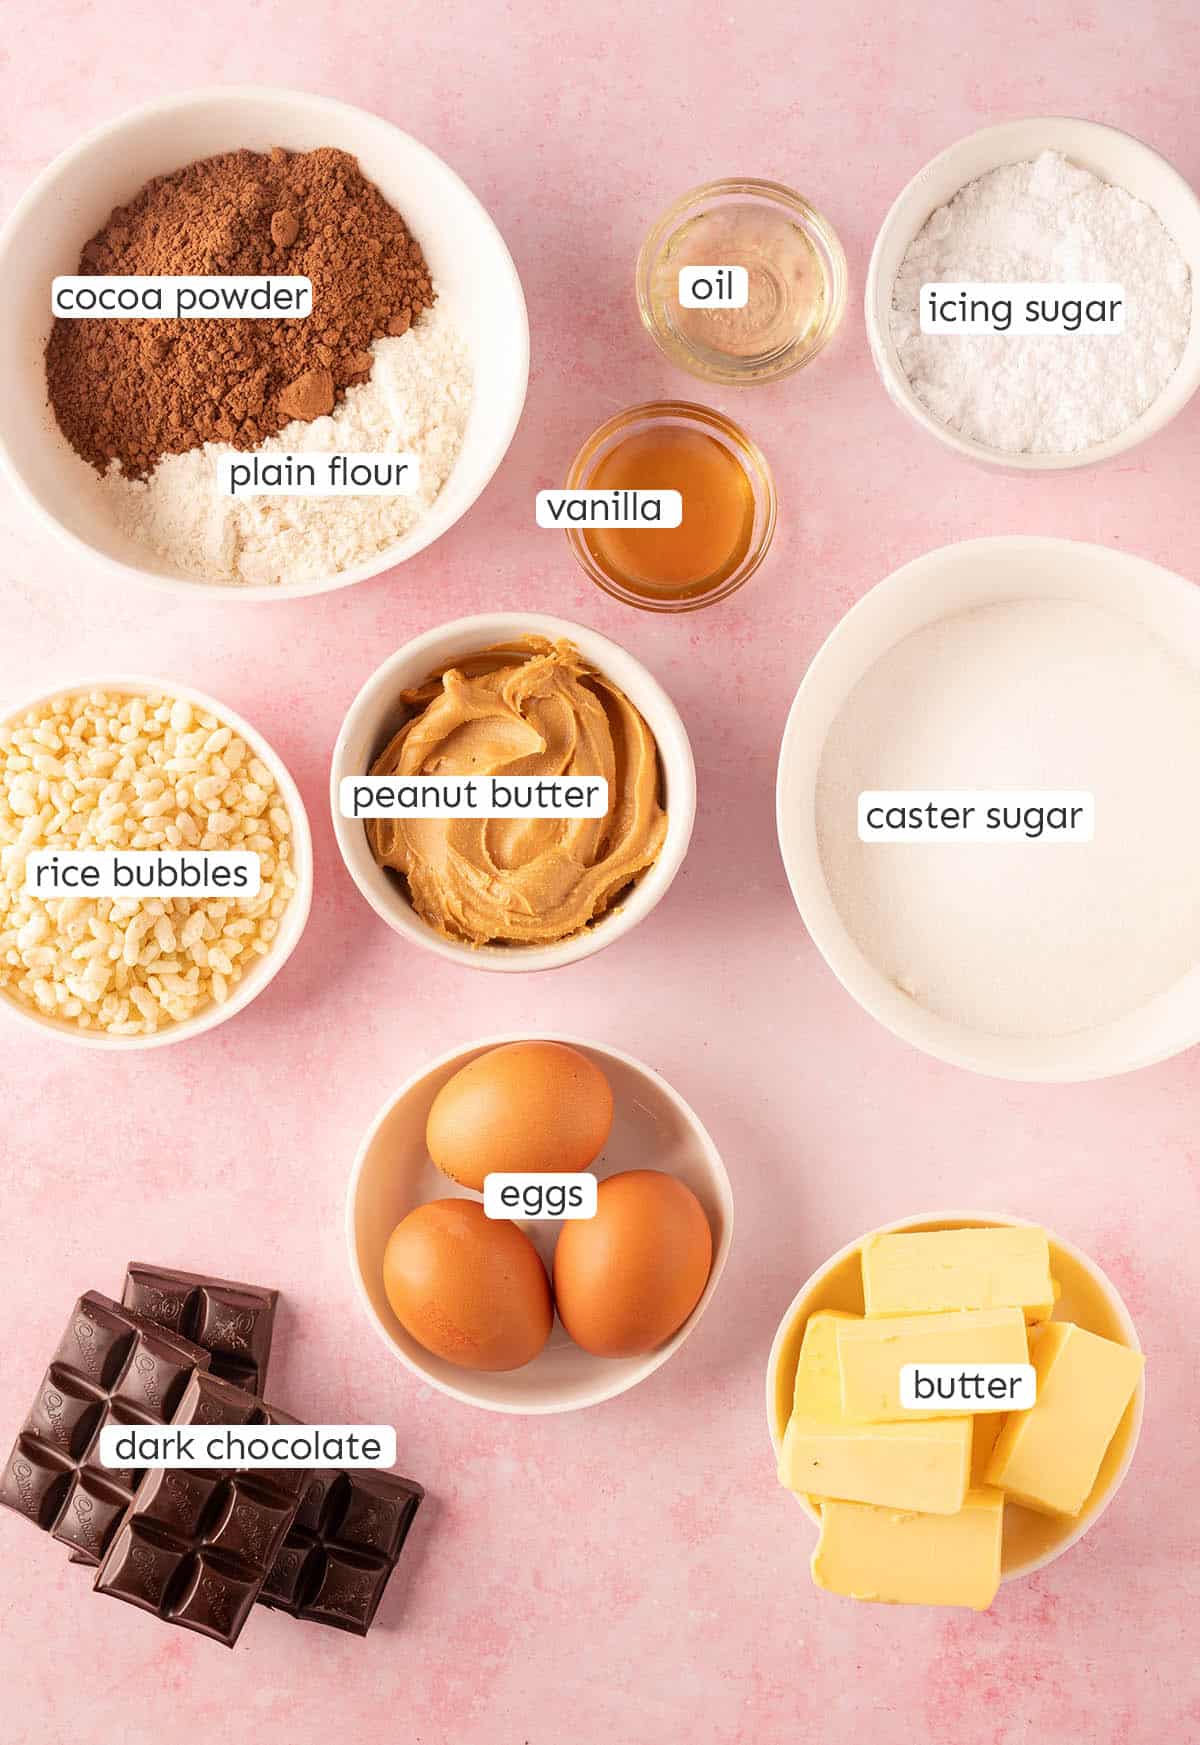 All the ingredients needed to make Brownie Crunch Bars from scratch.